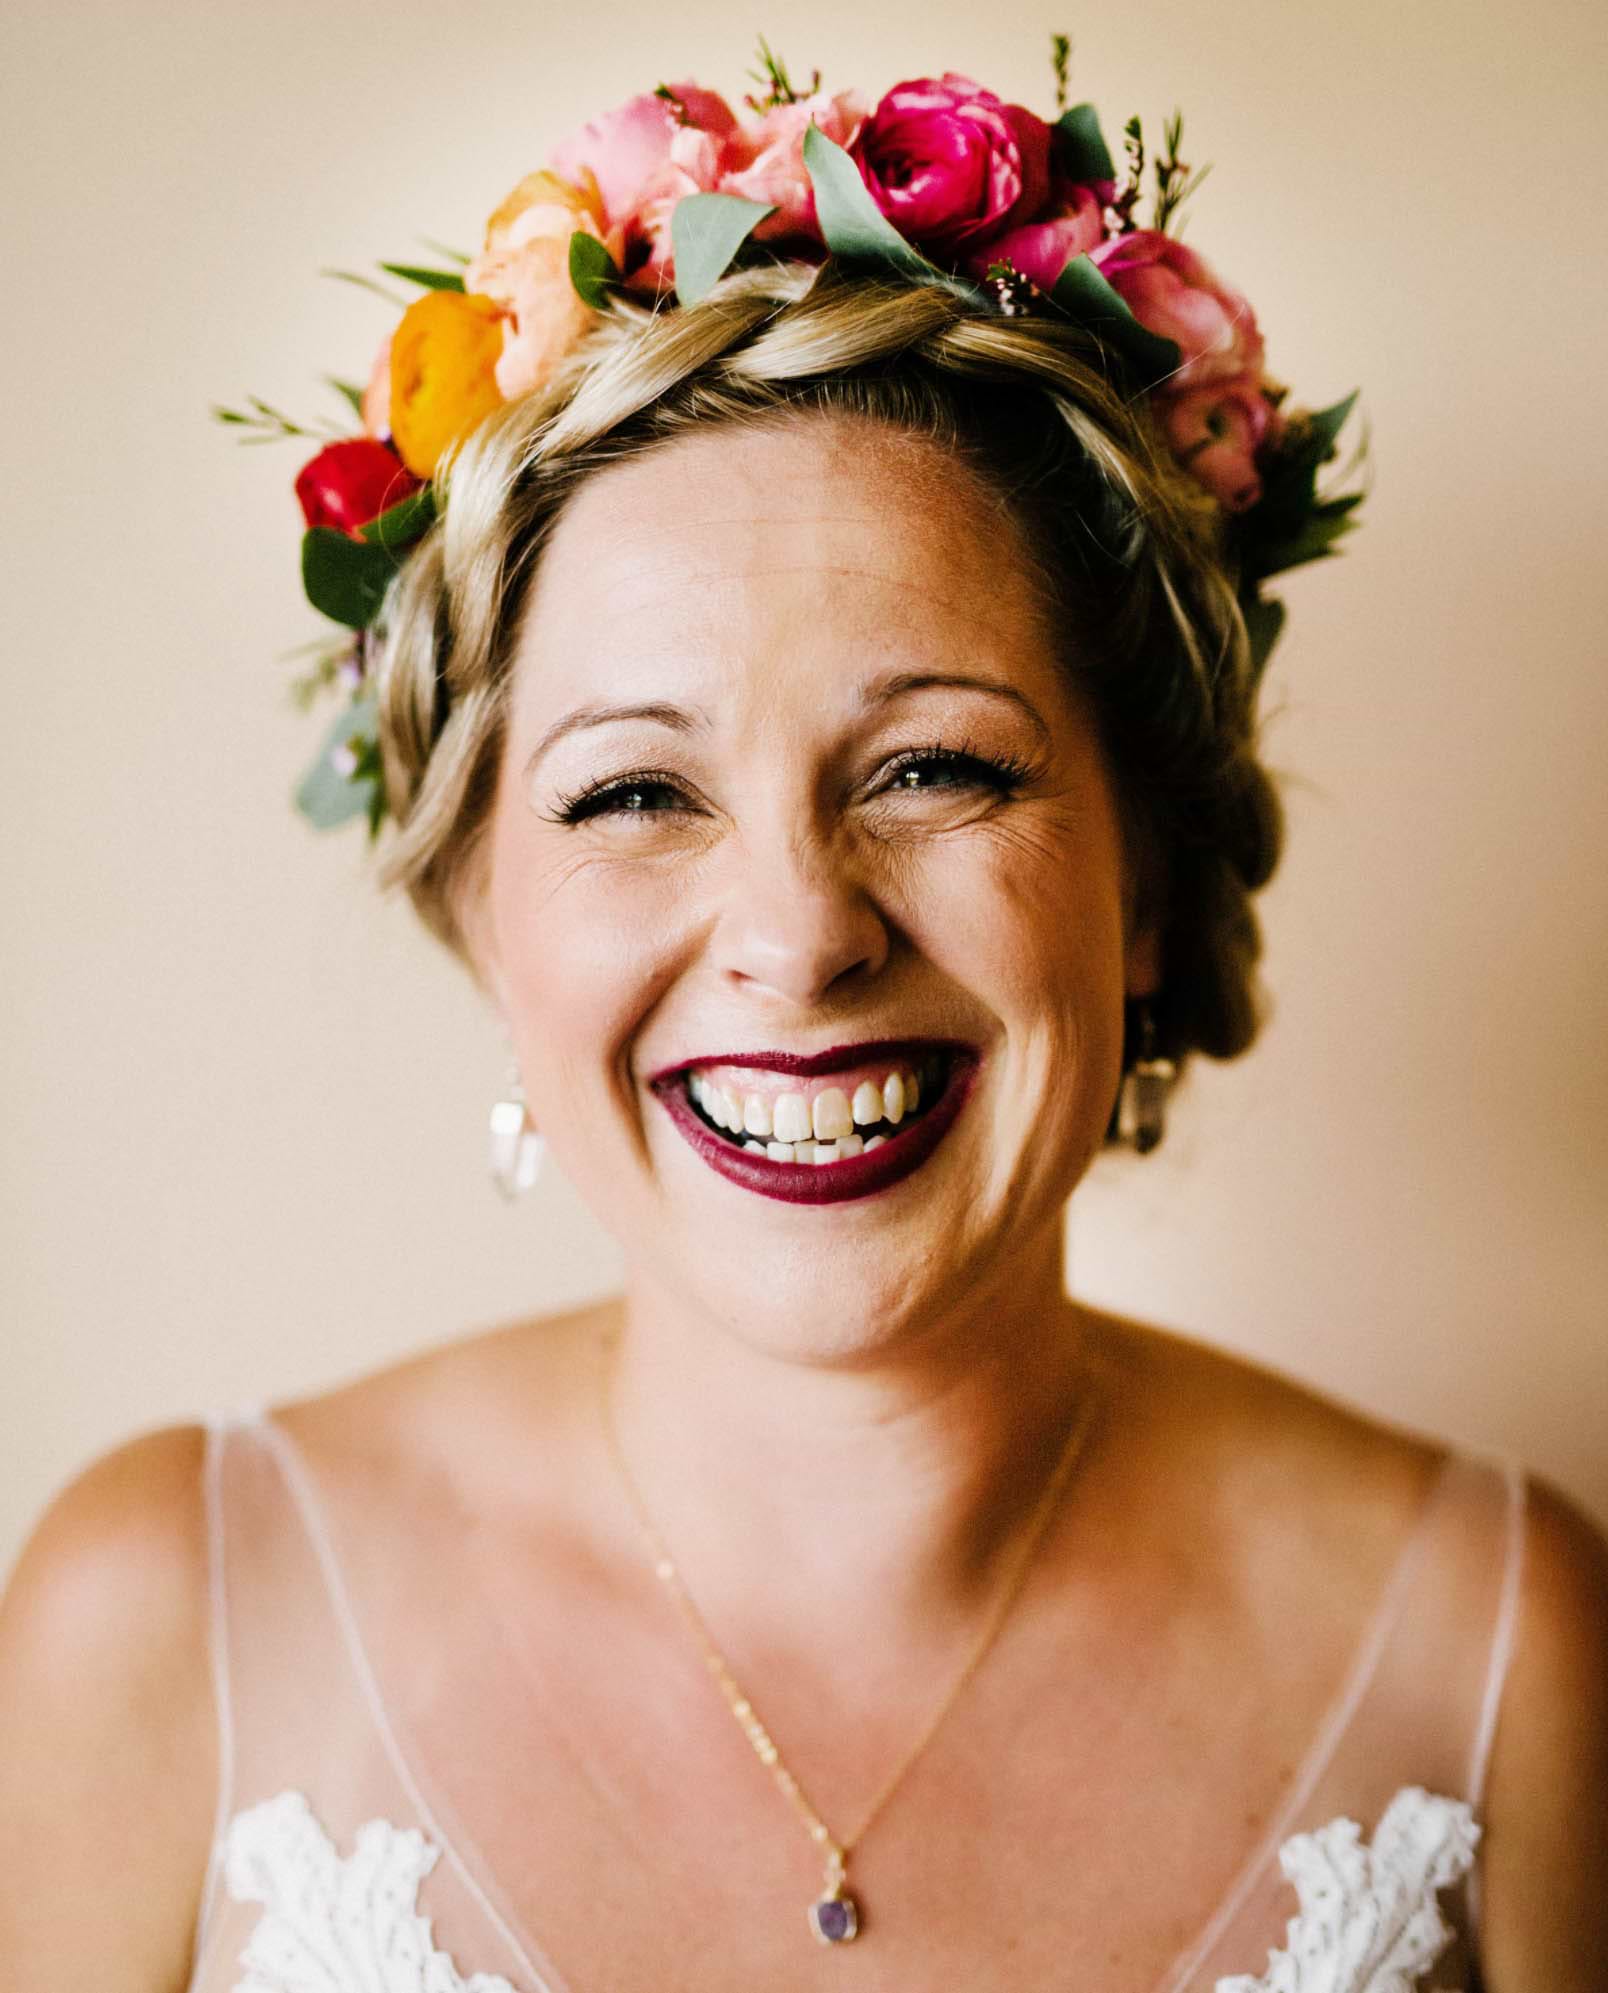 Gorgeous Bride With Colorful Flower Crown by Painted Primrose